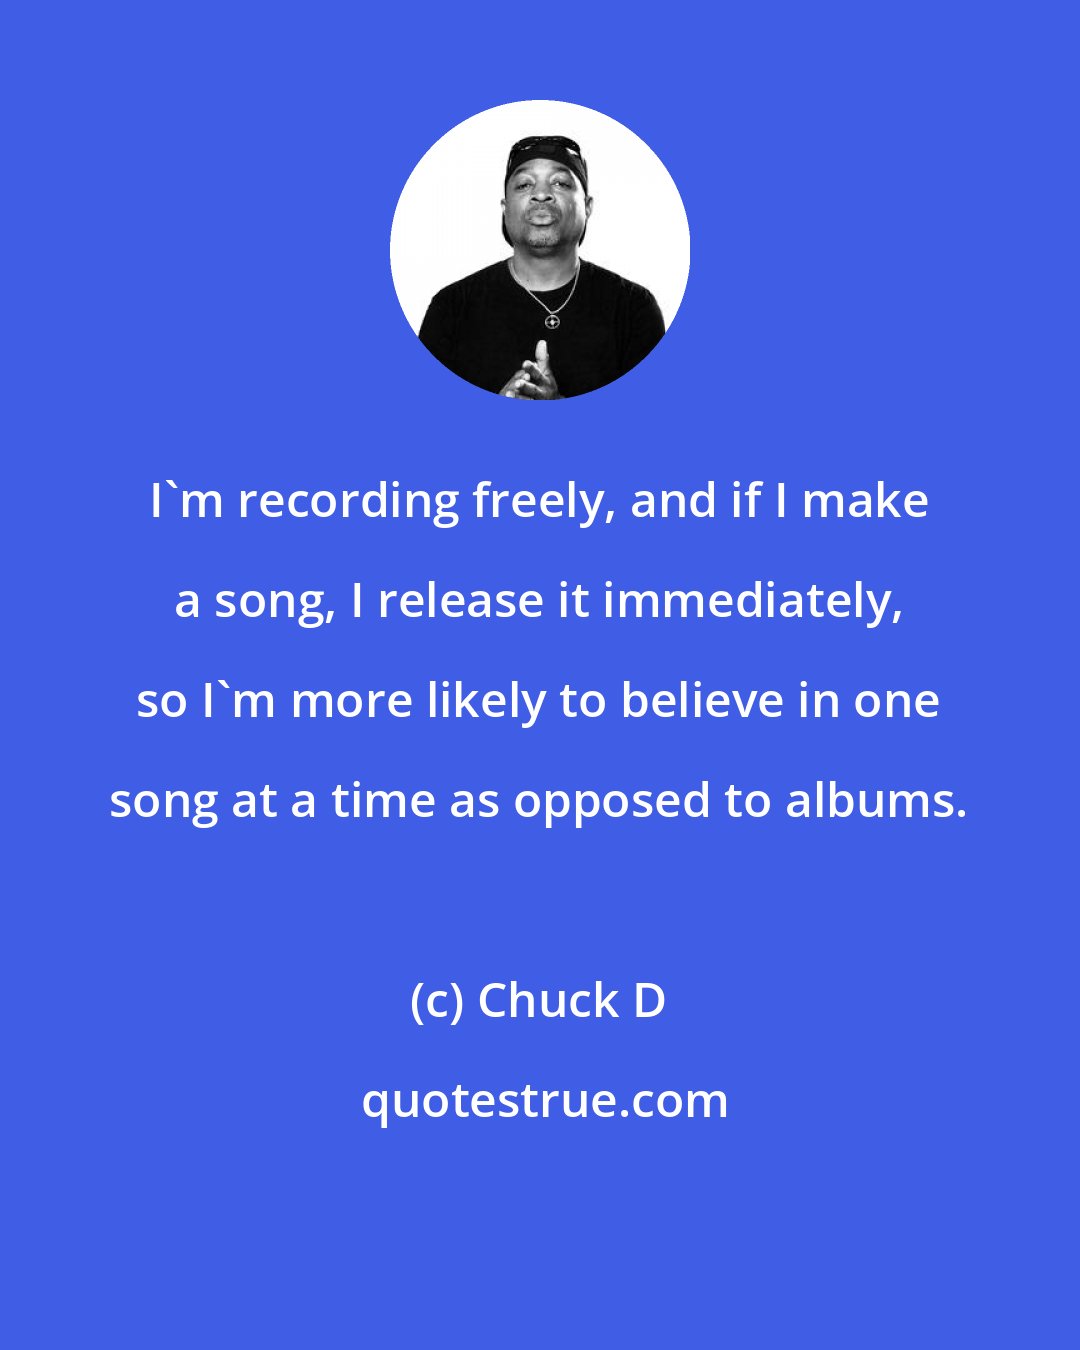 Chuck D: I'm recording freely, and if I make a song, I release it immediately, so I'm more likely to believe in one song at a time as opposed to albums.